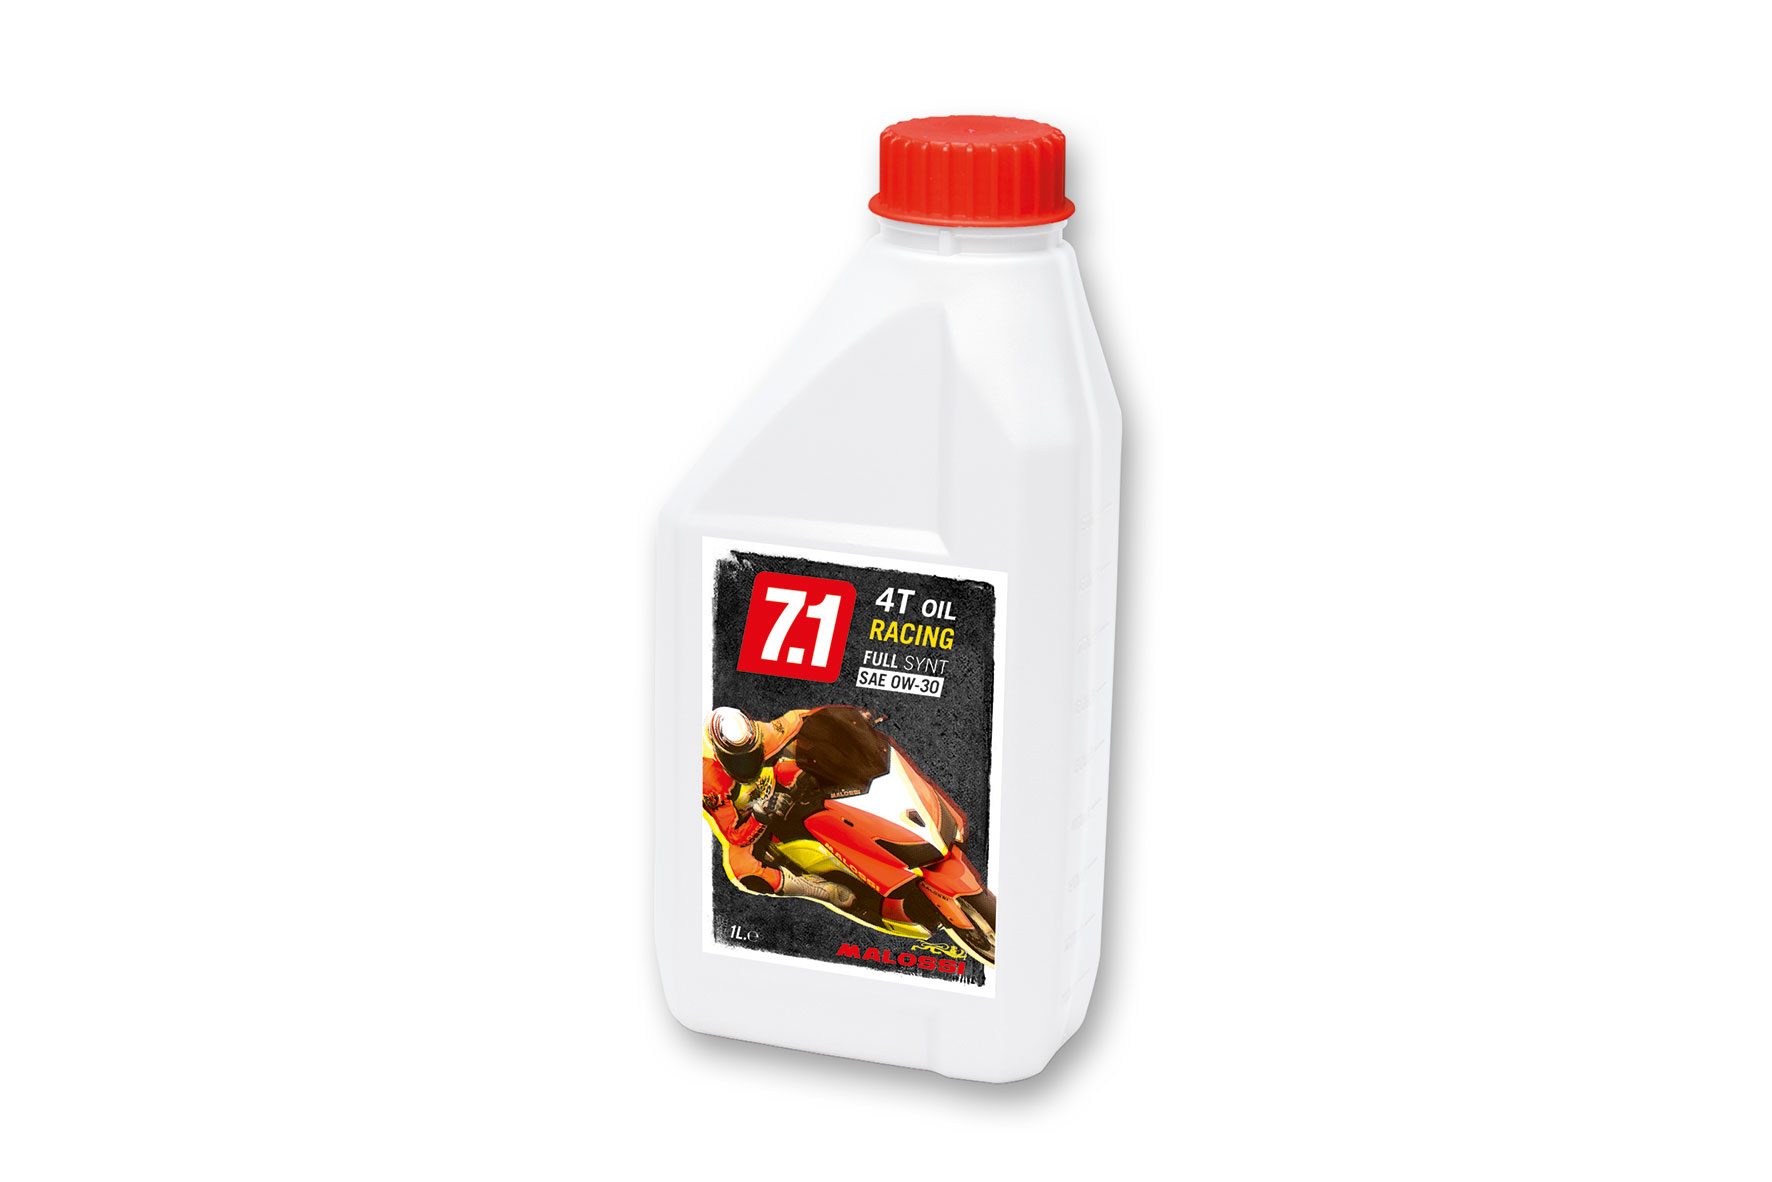 FLASCHE 7.1 4T OIL RACING Full Synt (SAE 0W-30) 1L